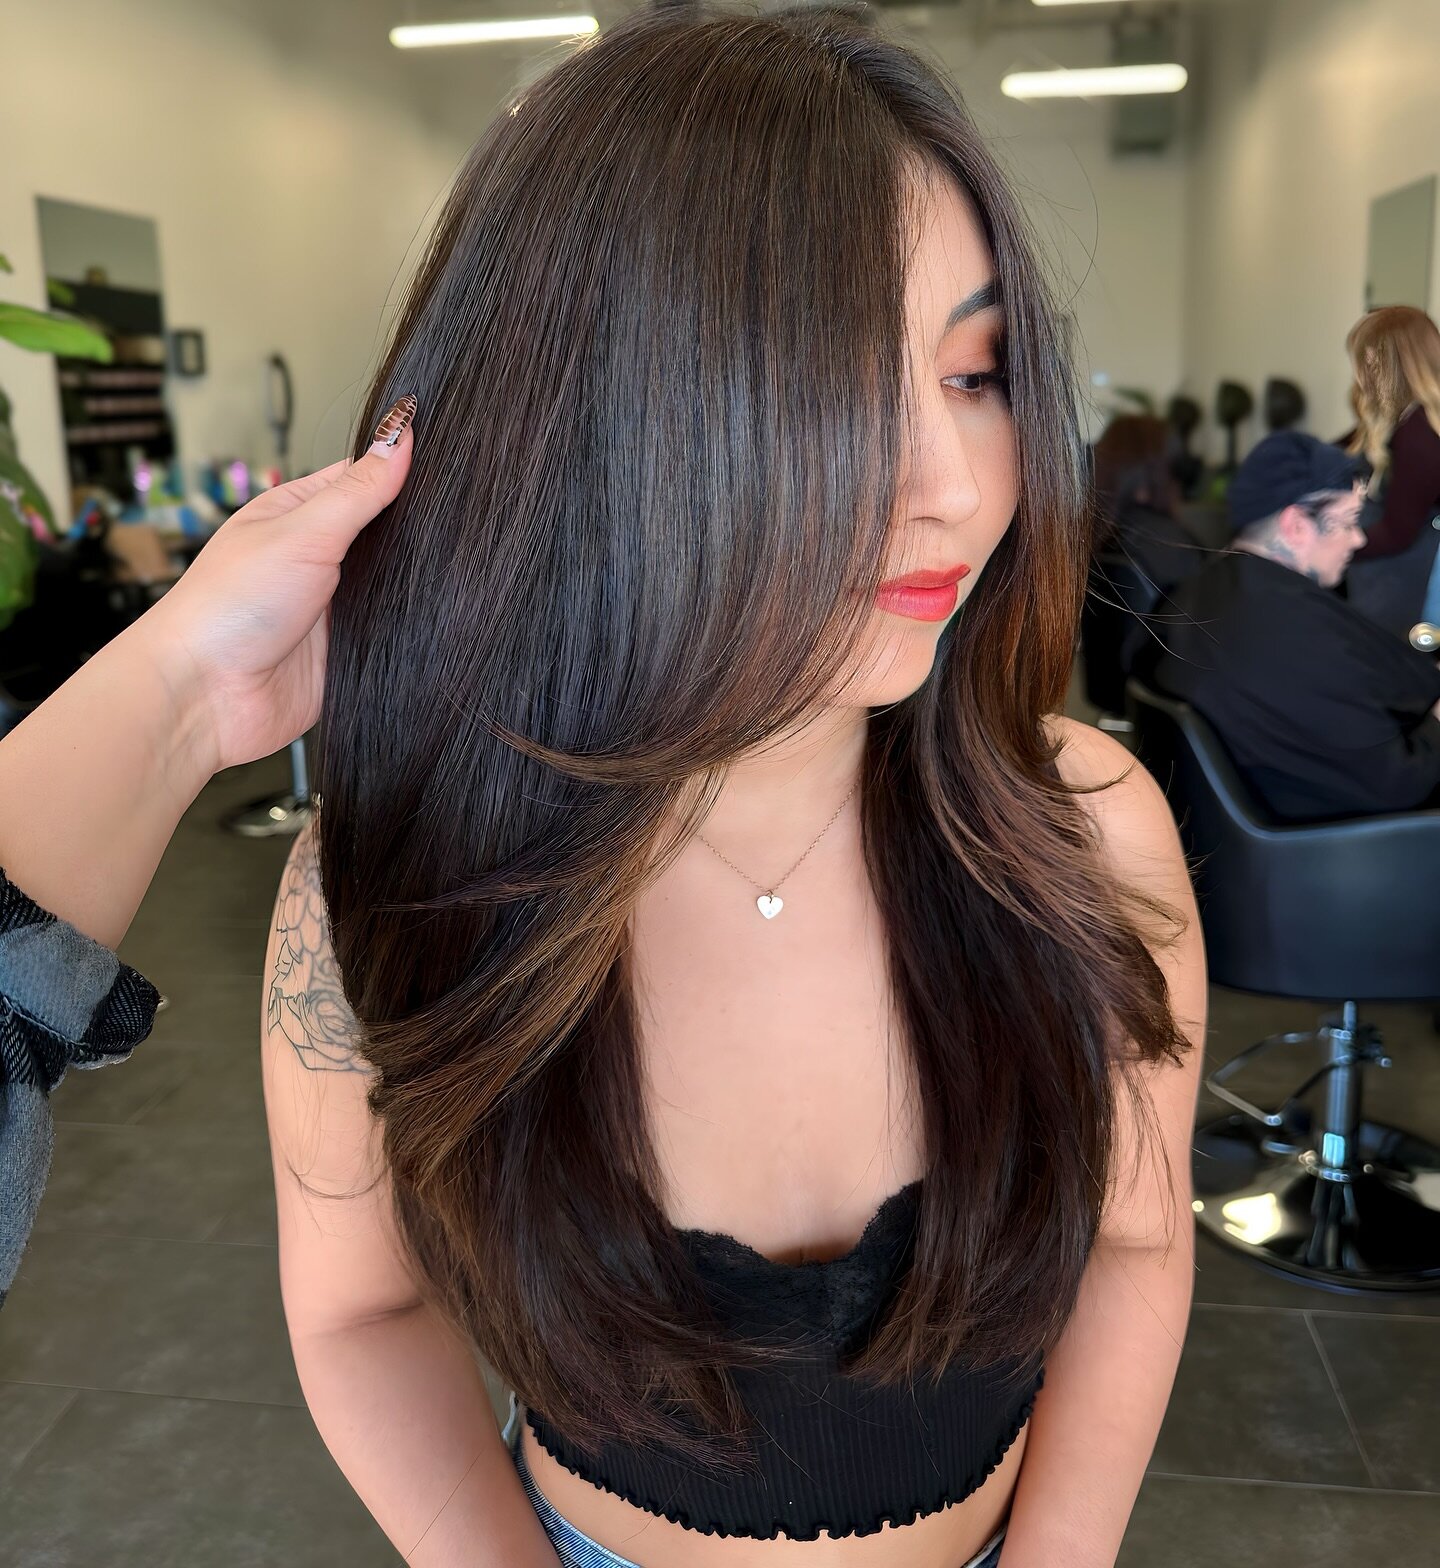 ✂️Layered Beauty by @glammedxlizbeth!😍 We have an OBSESSION with layered haircuts!💕 Text us at 210-316-2045 to schedule your next appointment! Can&rsquo;t wait to see you!🫶🏻✨ &bull;
&bull;
&bull;
&bull;
&bull;
&bull;
&bull;
&bull;
&bull;
&bull;
&